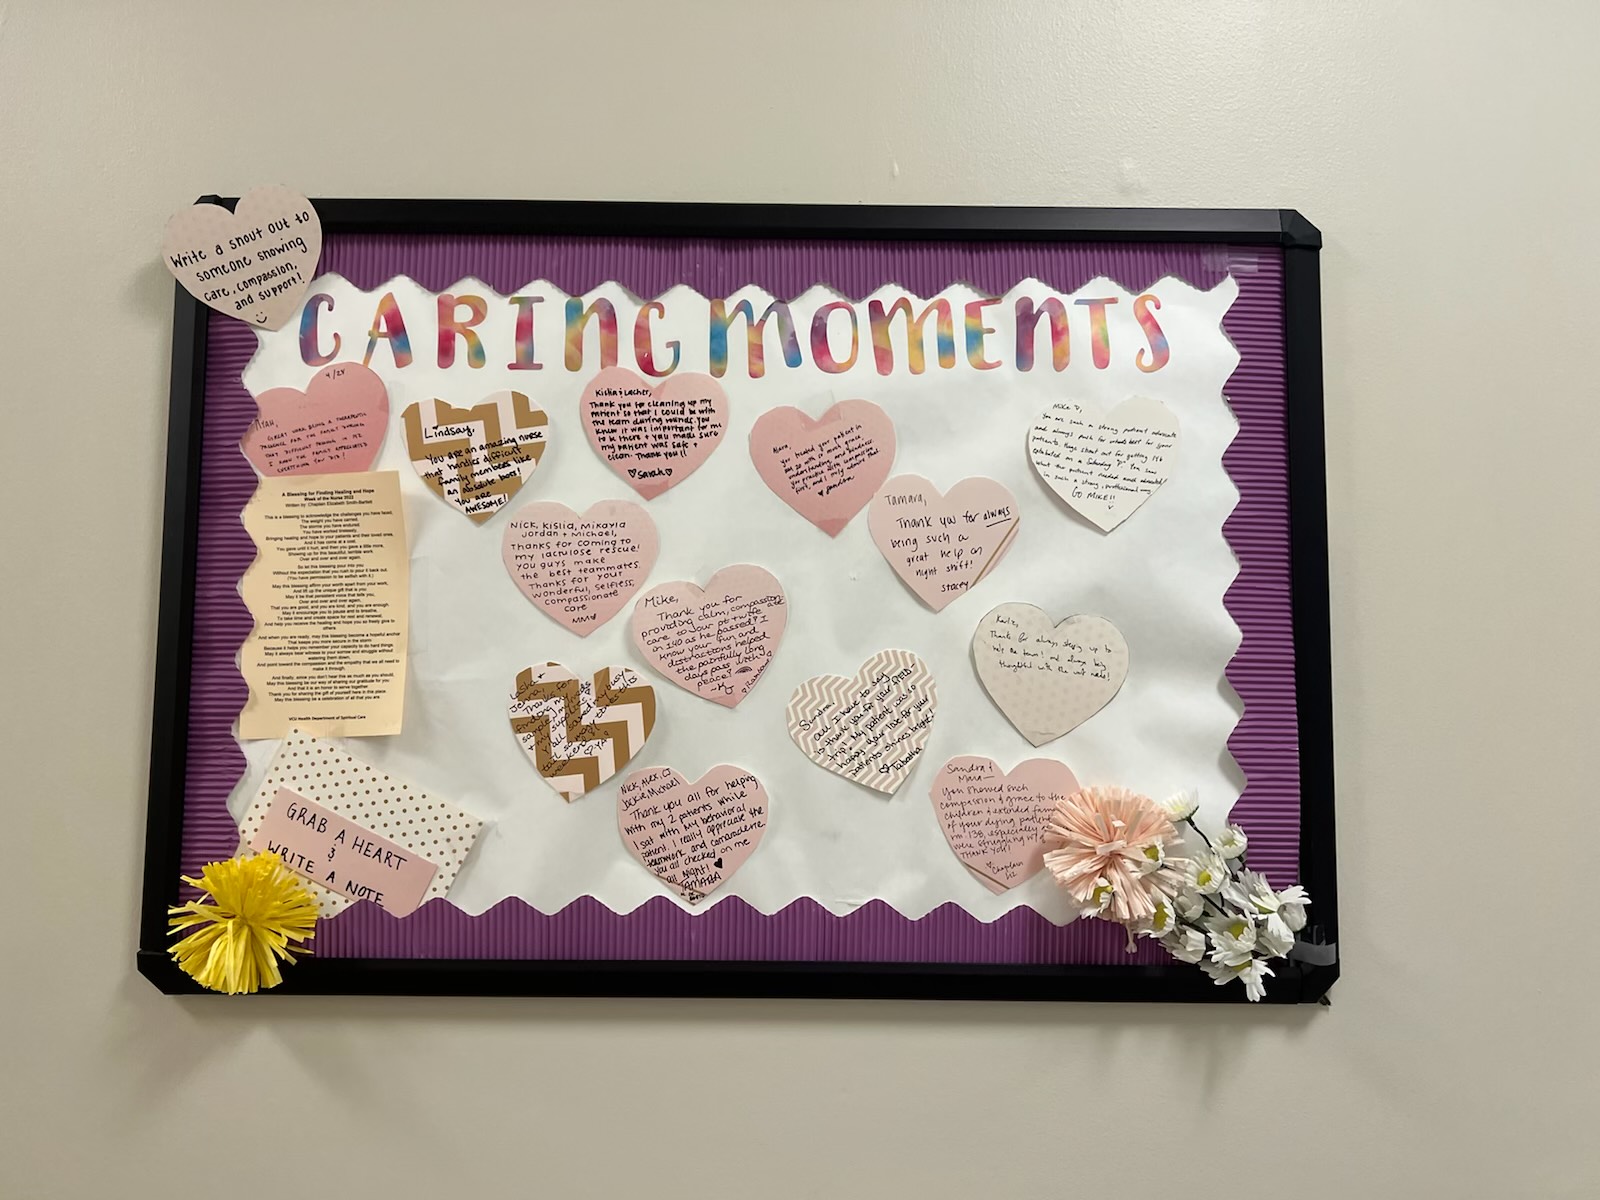 A board with paper hearts